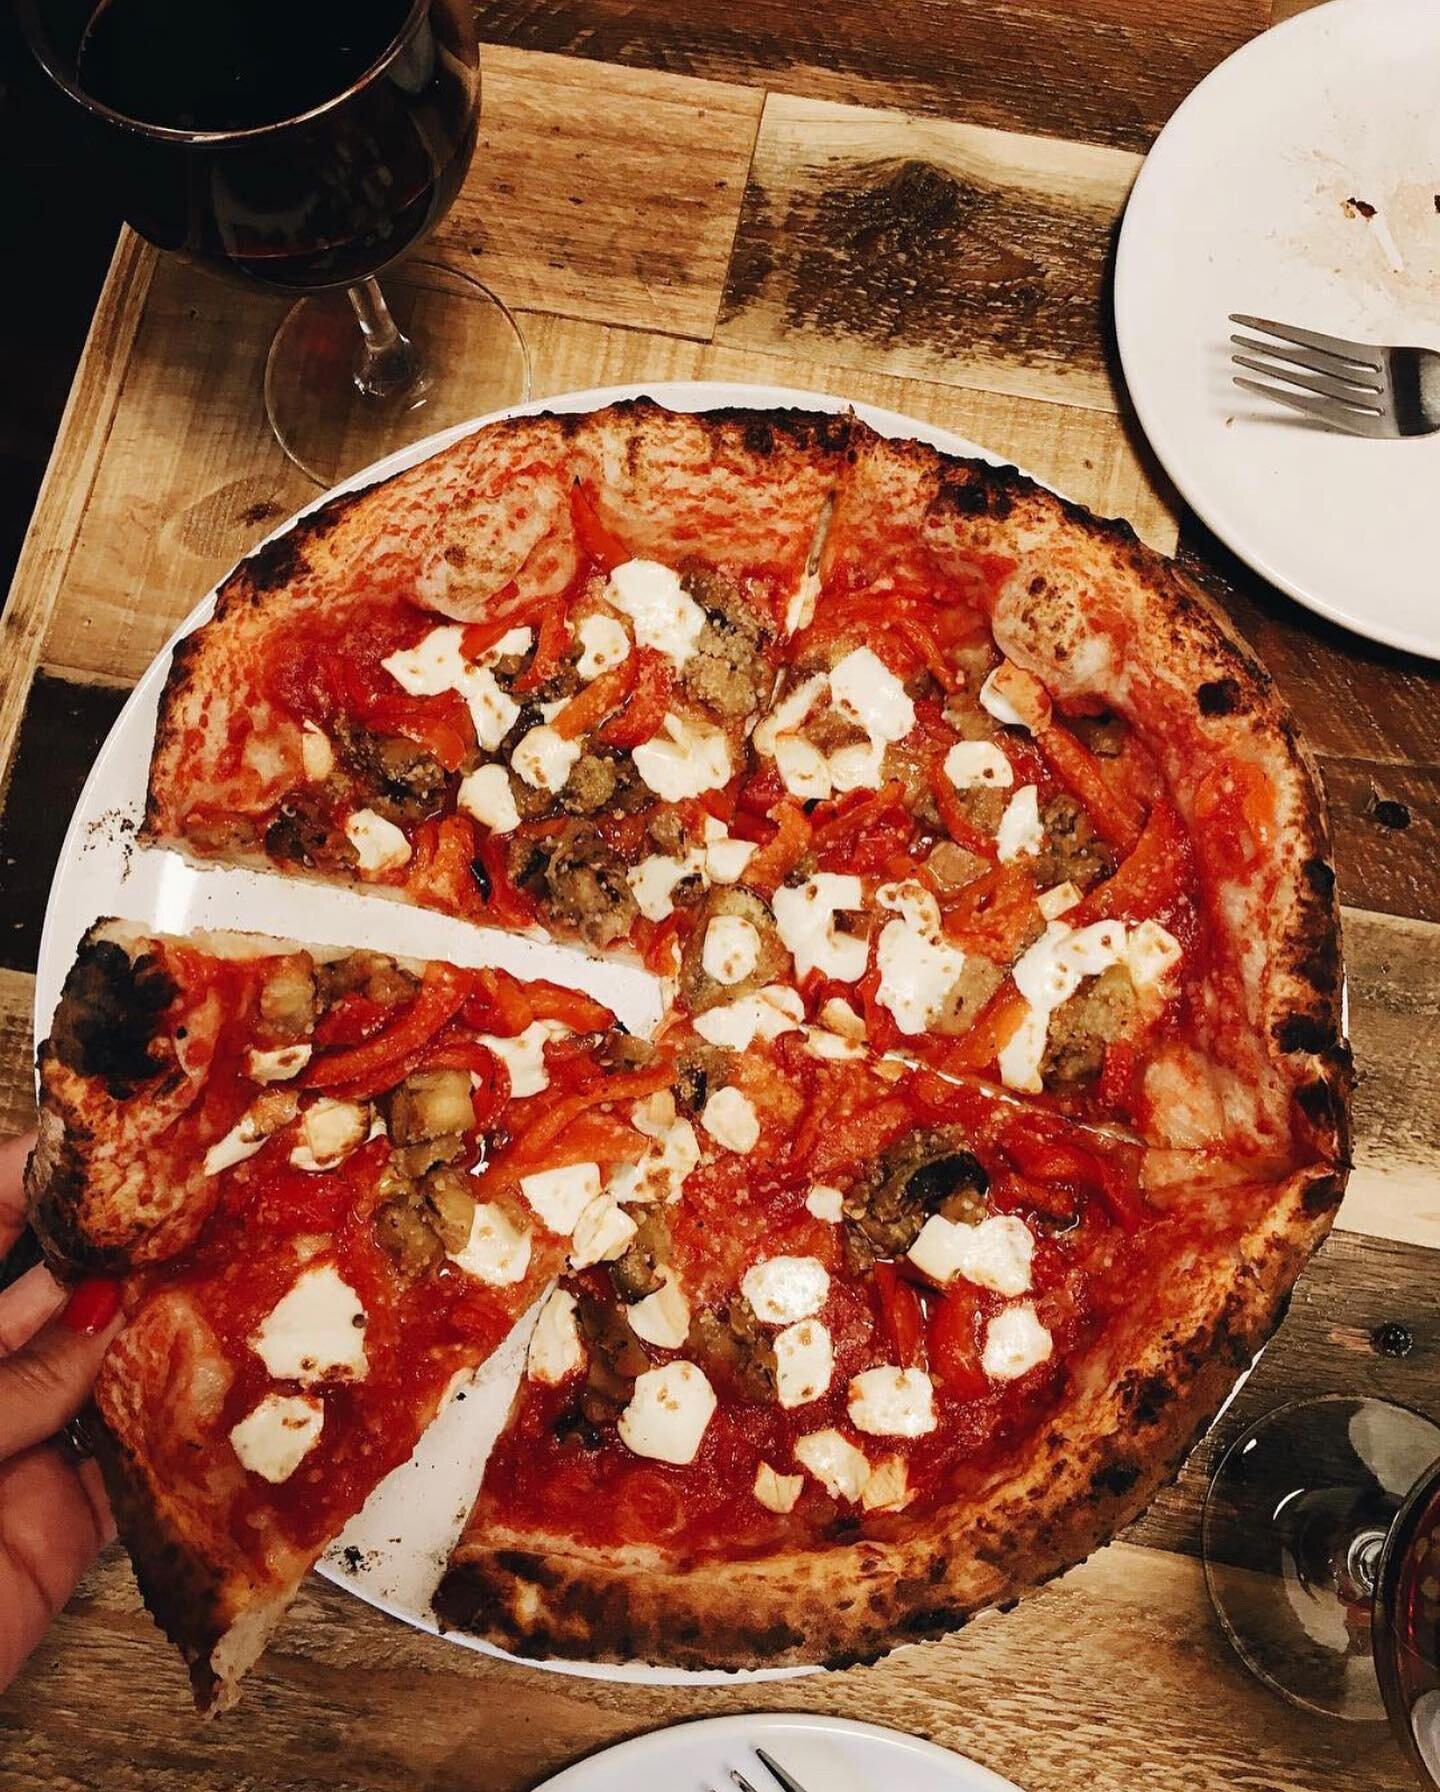 DATE NIGHT IDEA 🍕🍷 Dine-in @pupatellarva and enjoy appetizers, wood-fired pizza, and wine *chefs kiss* Pictured here is the Eggplant &amp; Red Pepper: grilled eggplant, roasted red pepper, and fresh provola (smoked mozzarella) 👌&nbsp;Personally, w